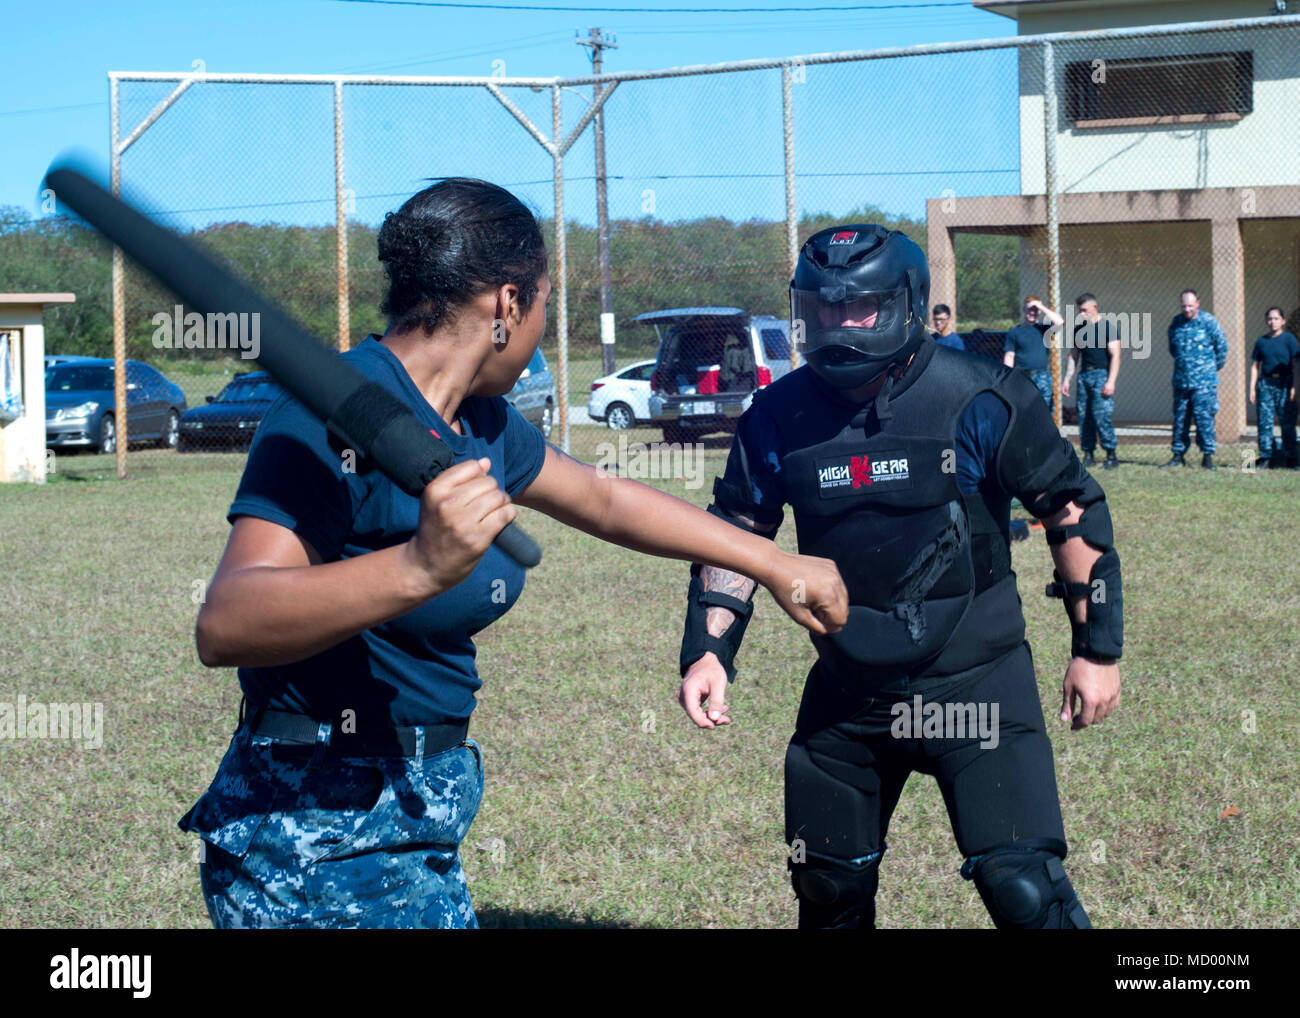 SANTA RITA, Guam ( March 9, 2018) Boatswain's Mate 3rd Class Jazlen Mason battles Red Man, Gunner's Mate Seaman Blake day, both assigned to the submarine tender USS Frank Cable (AS 40), during non-lethal weapons training, while under the effects of Oleoresin Capsicum, pepper spray, on Naval Base Guam, March 9. Frank Cable, forward-deployed to Guam, repairs, rearms and reprovisions deployed U.S. Naval Forces in the Indo-Pacific region.   (U.S. Navy photo by Mass Communication Specialist 3rd Class Alana Langdon/Released) Stock Photo